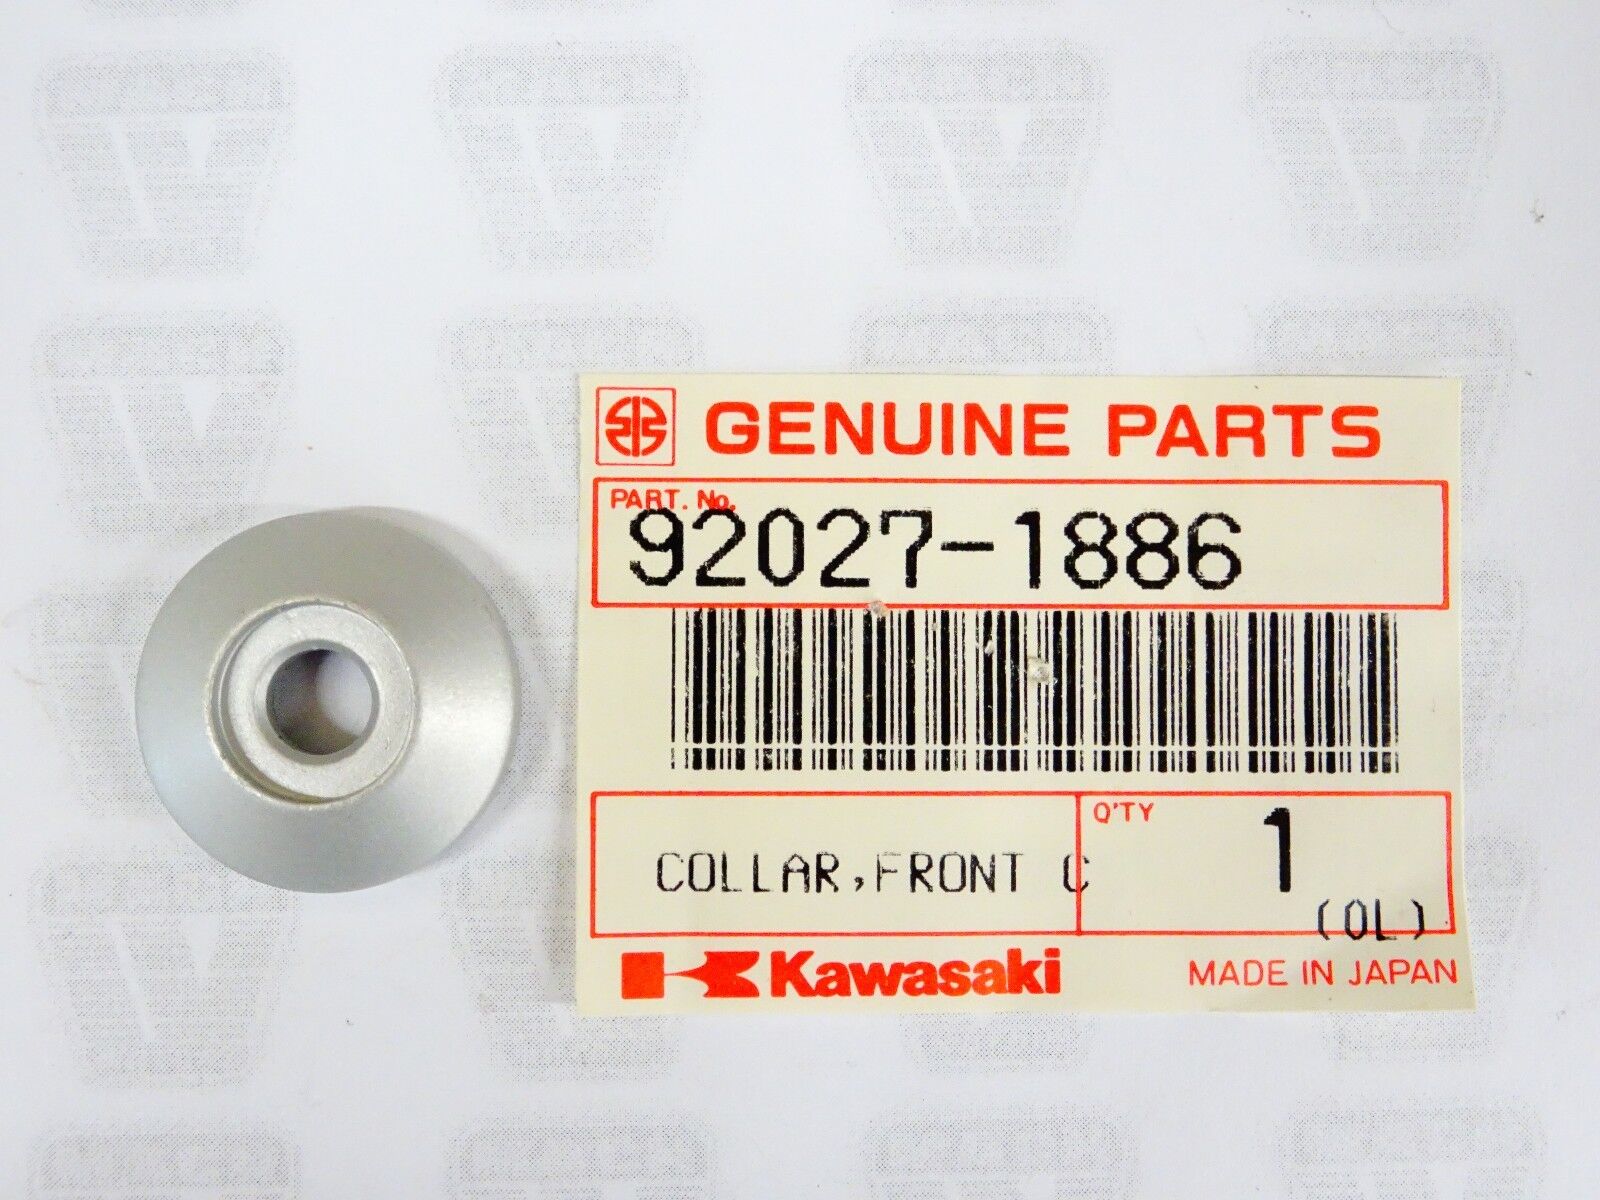 NOS Kawasaki 92027-1886 Cowling Front Collar Zx750 Zx600 for sale 